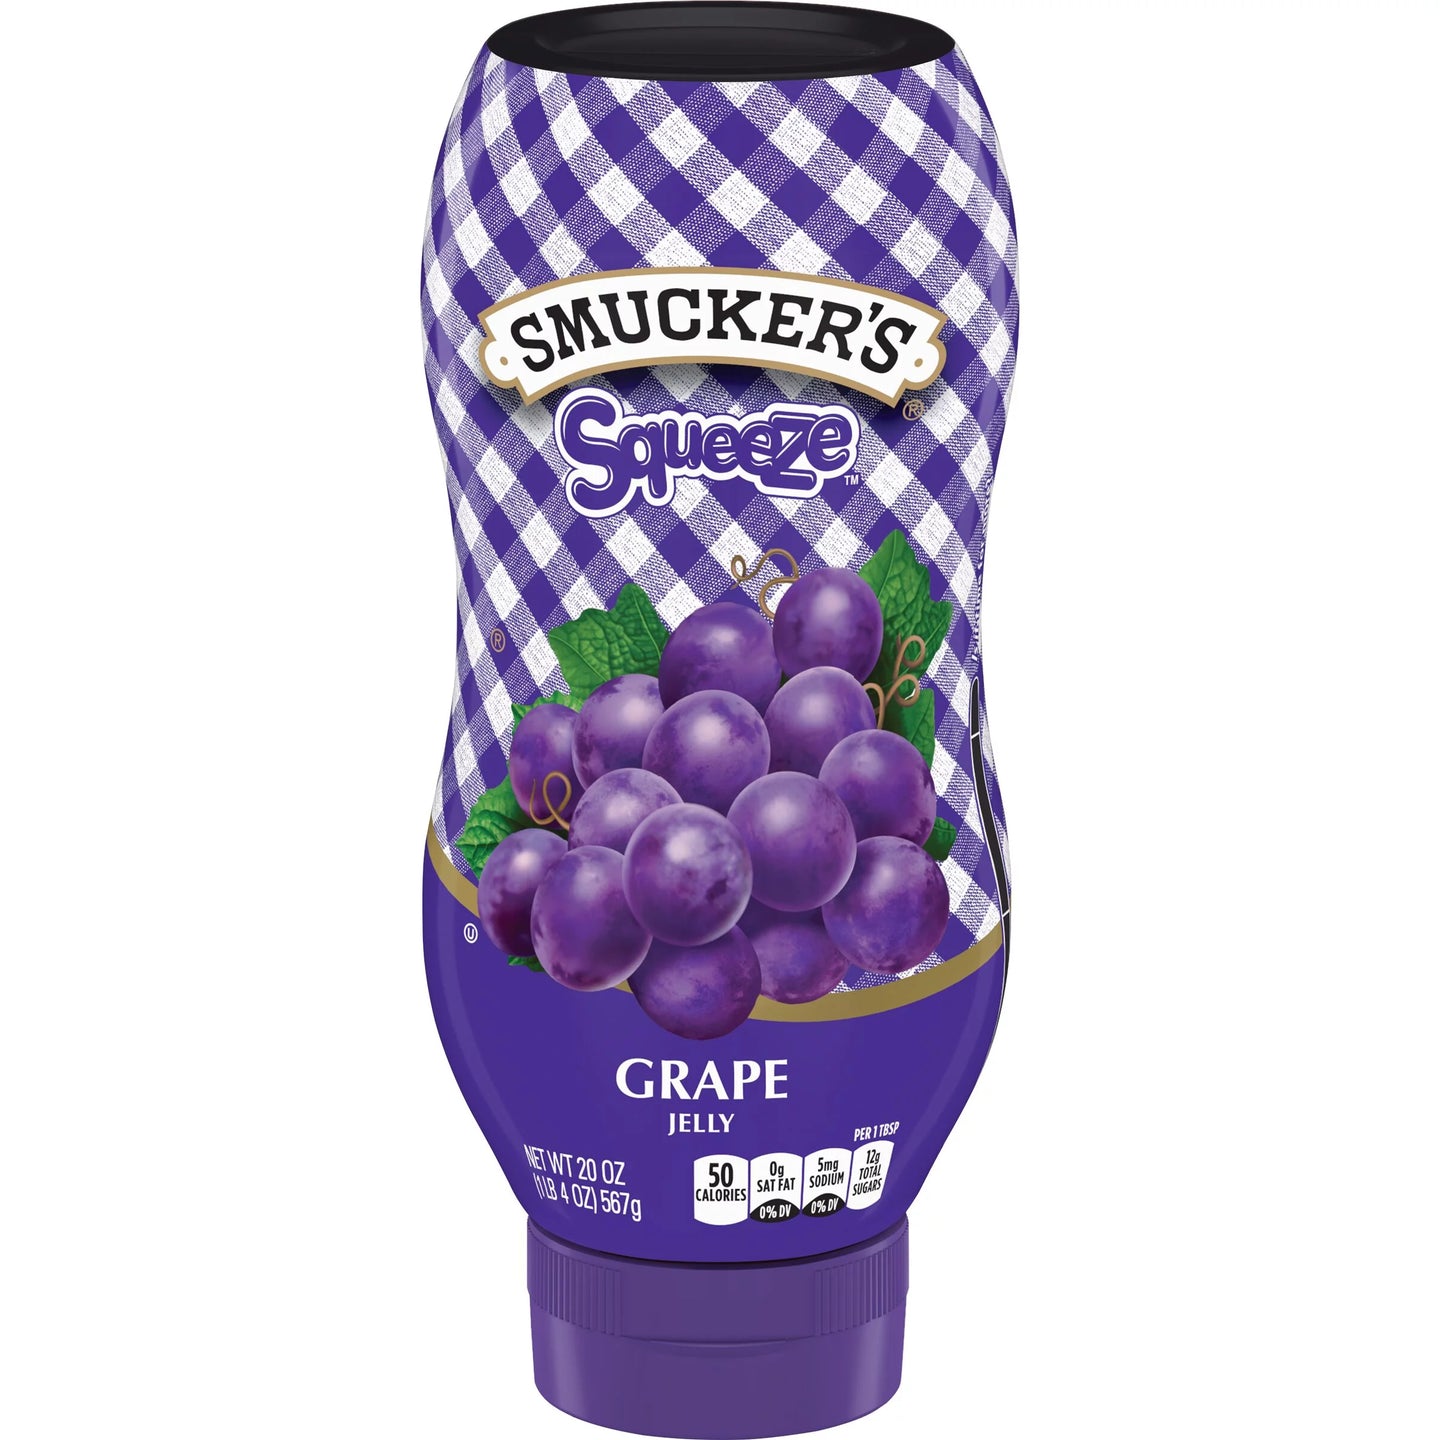 Smuckers Squeeze Jelly Grape